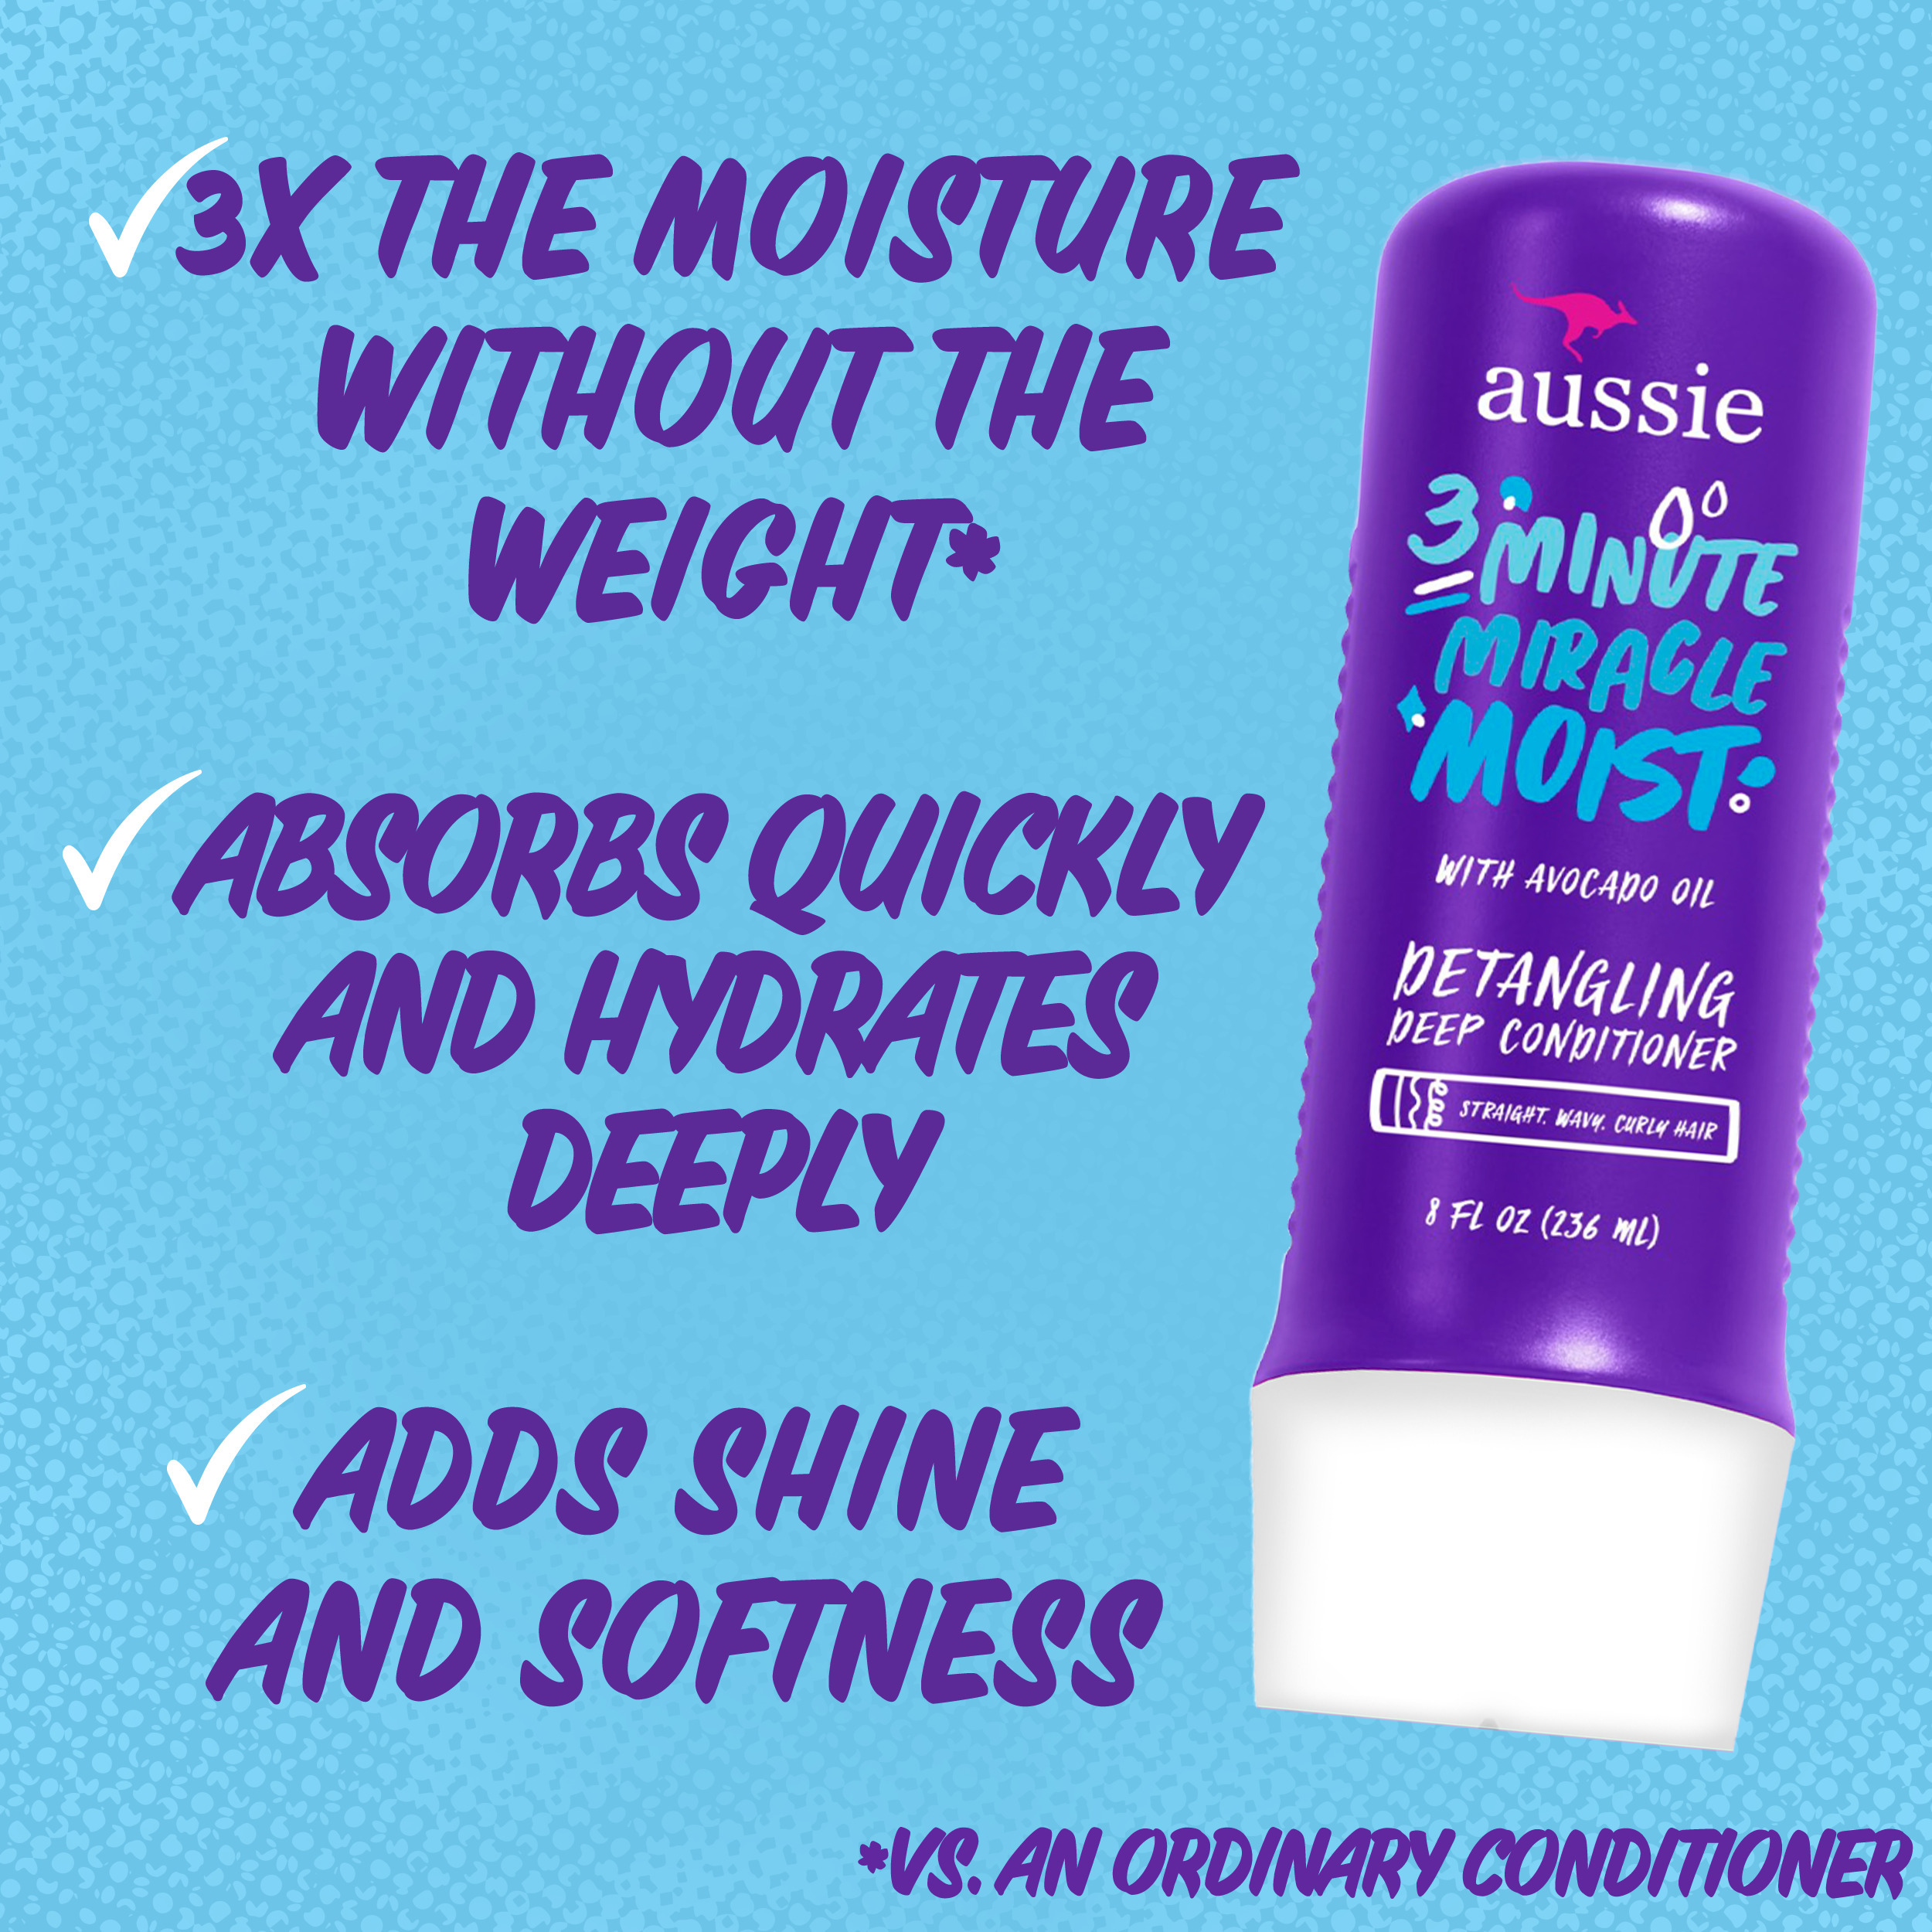 Aussie 3 Minute Miracle Moist Conditioner, Paraben Free, Twin Pk, 8.0 fl oz. for All Hair Types - image 5 of 12